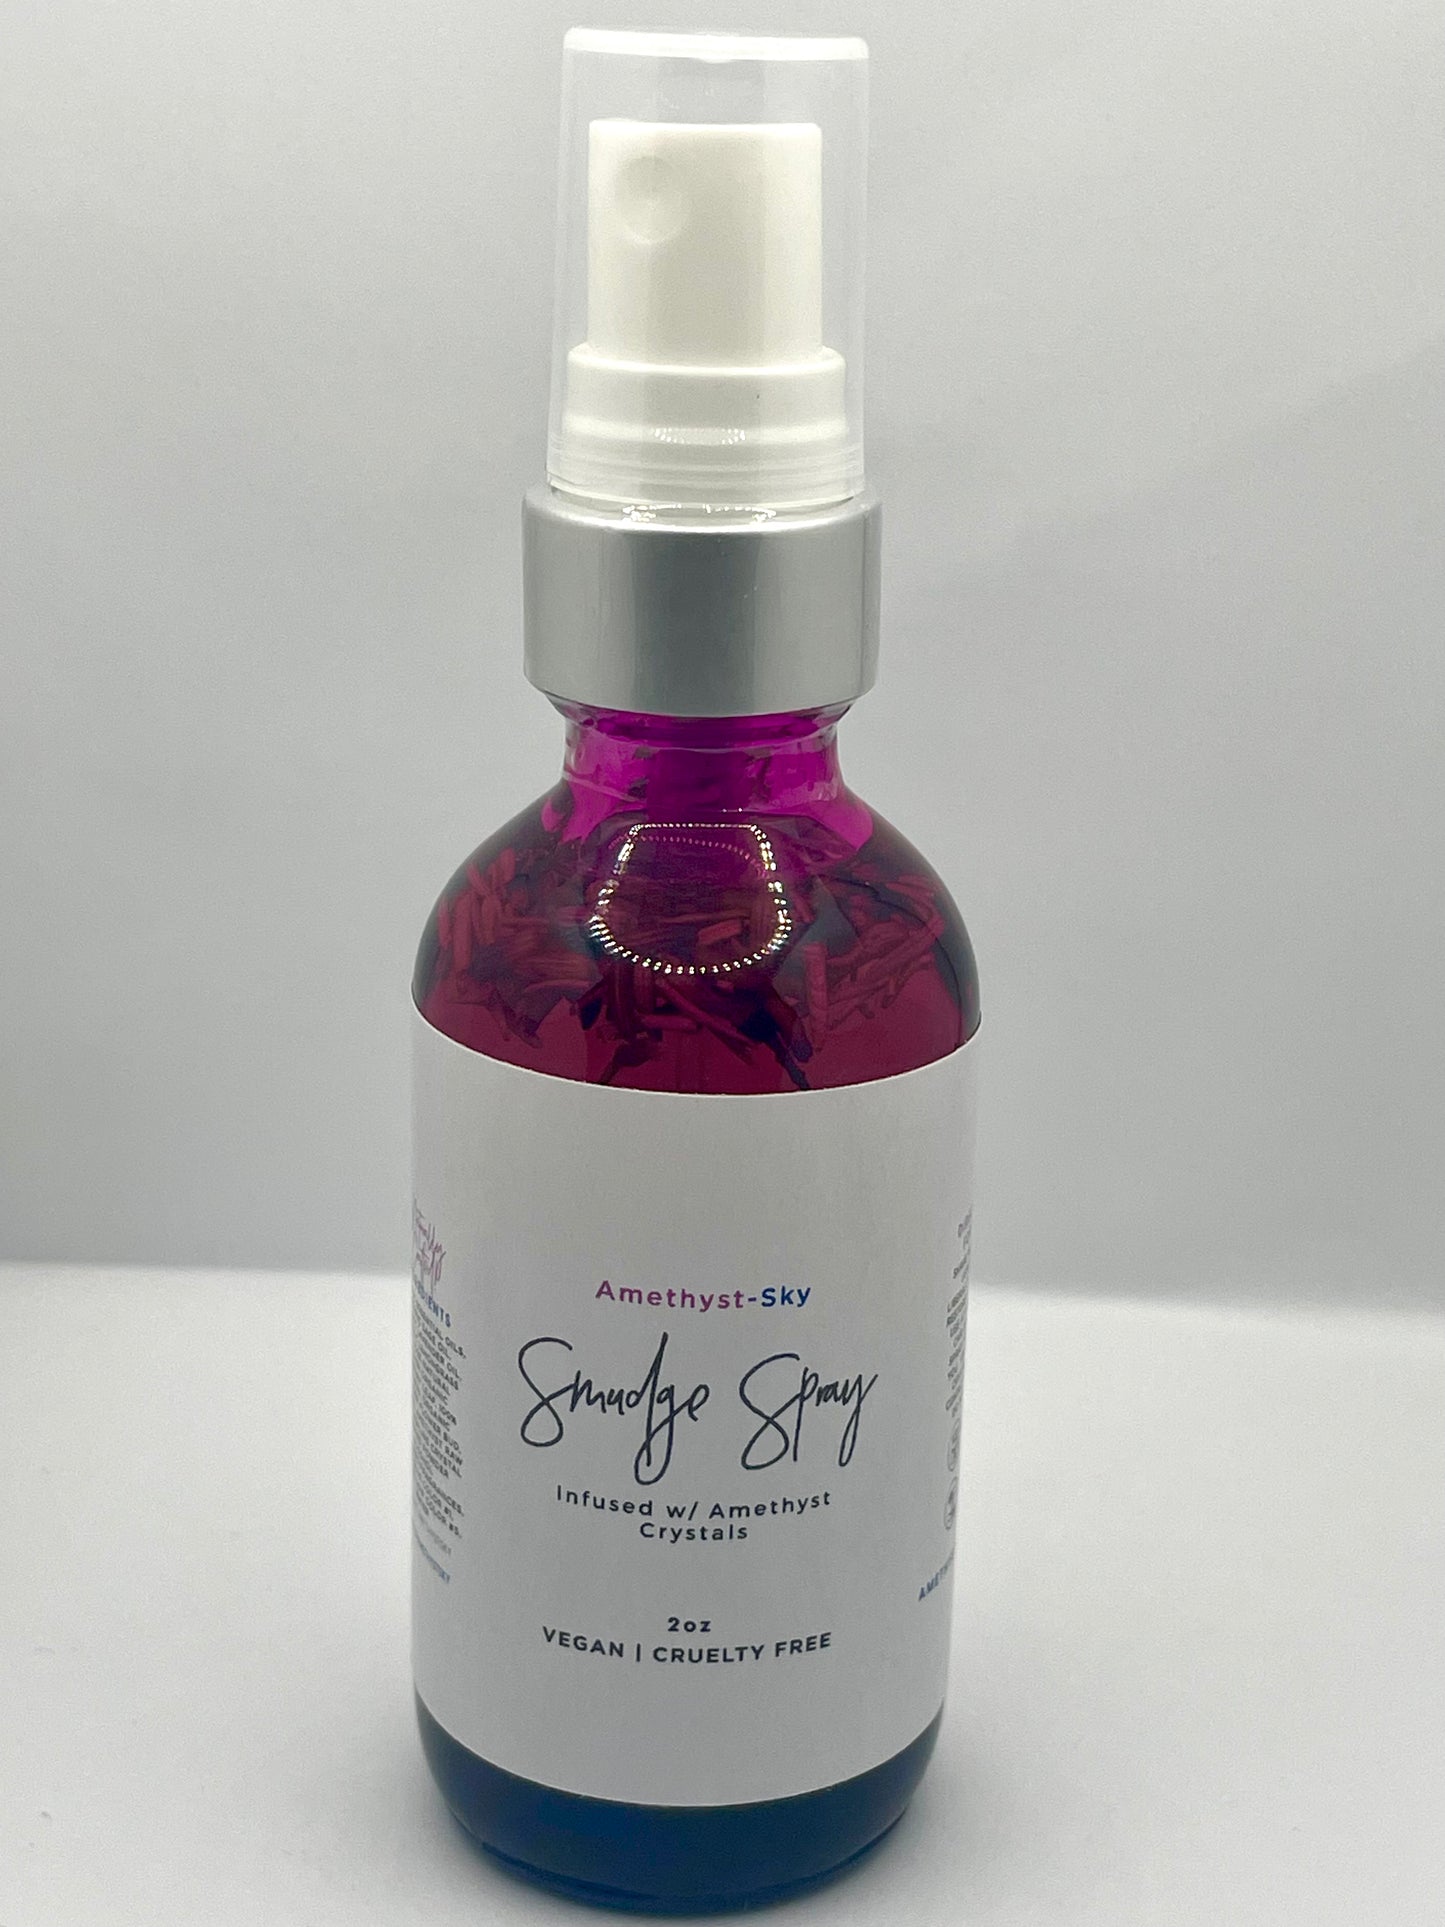 Smudge Spray infused with Amethyst Crystals